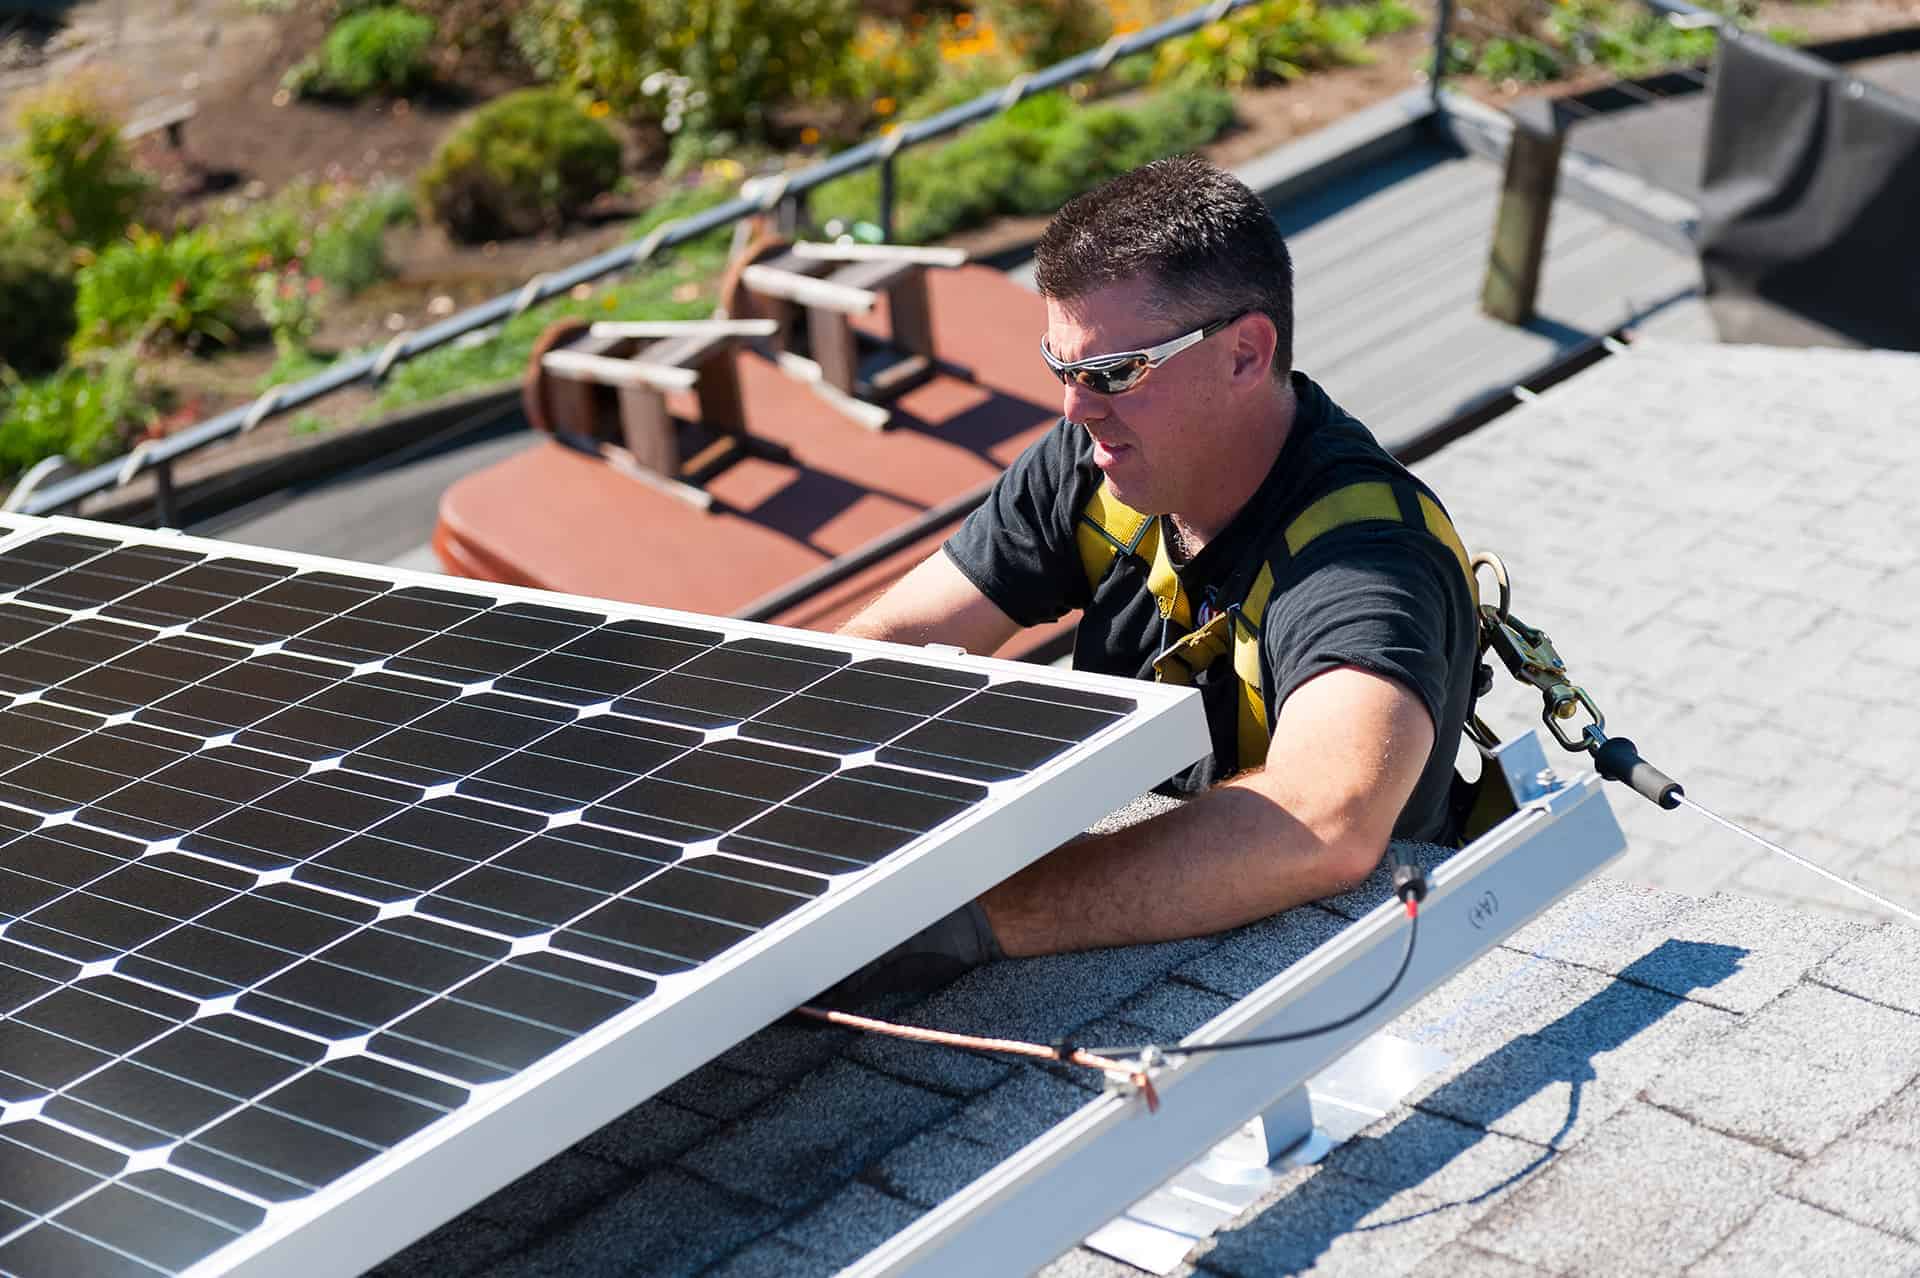 A Neil Kelly solar installer wires up solar panels on a roof